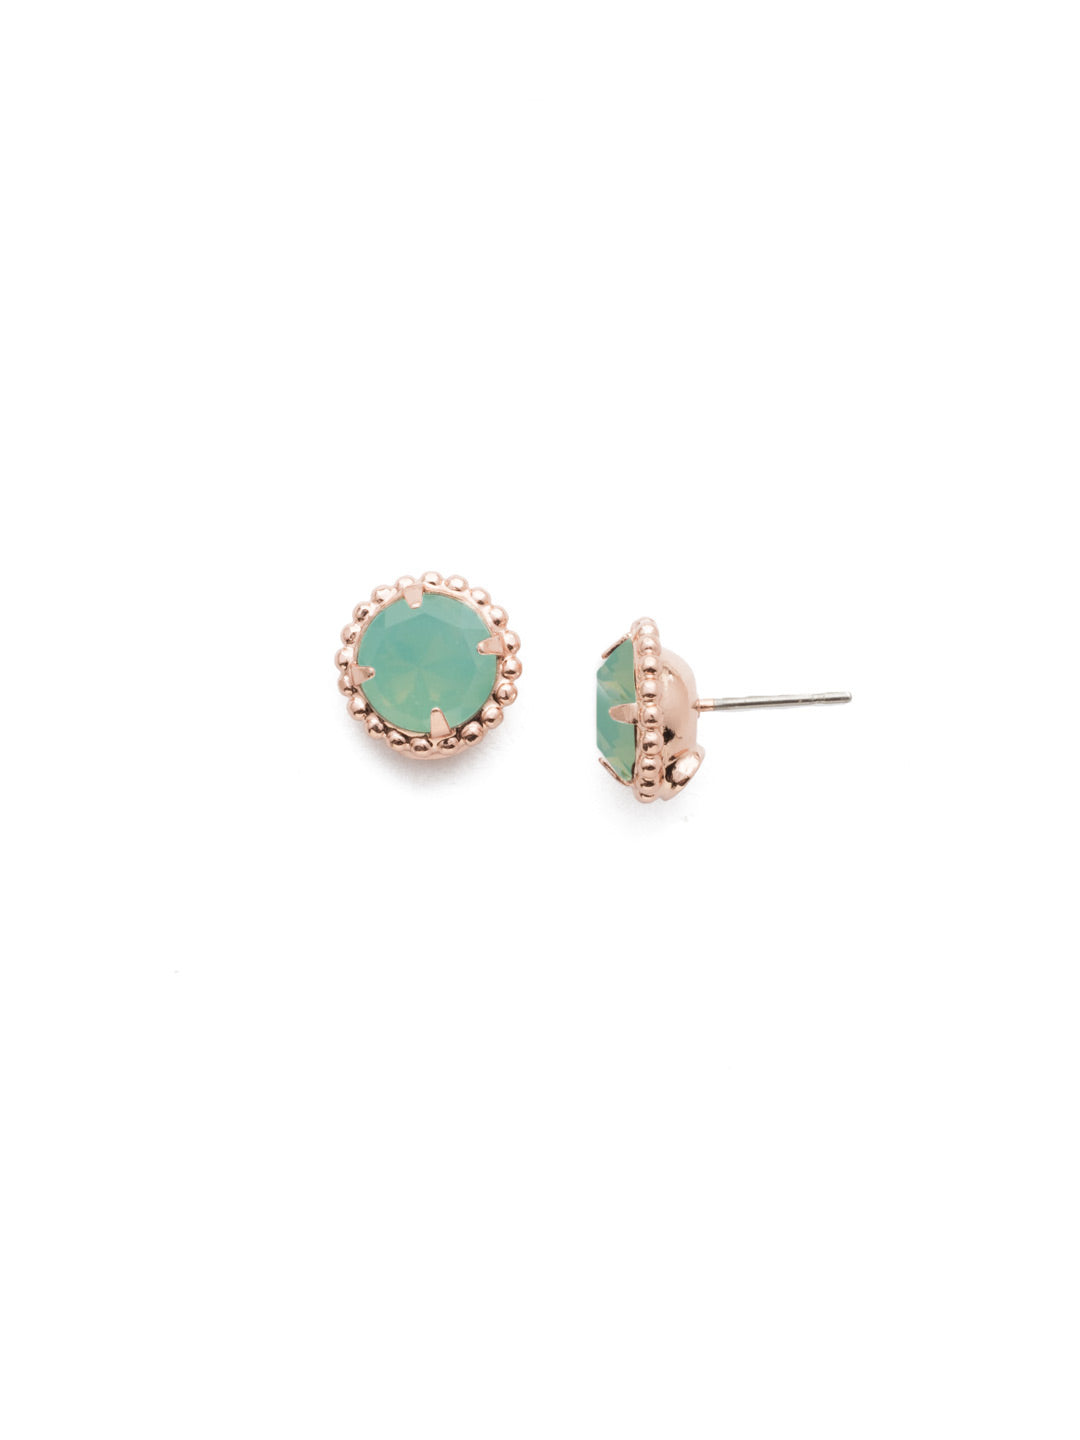 Simplicity Stud Earrings - EBY38RGPAC - <p>A timeless classic, the Simplicity Stud Earrings feature round cut crystals in a variety of colors; accented with a halo of metal beaded detail. Need help picking a stud? <a href="https://www.sorrelli.com/blogs/sisterhood/round-stud-earrings-101-a-rundown-of-sizes-styles-and-sparkle">Check out our size guide!</a> From Sorrelli's Pacific Opal collection in our Rose Gold-tone finish.</p>